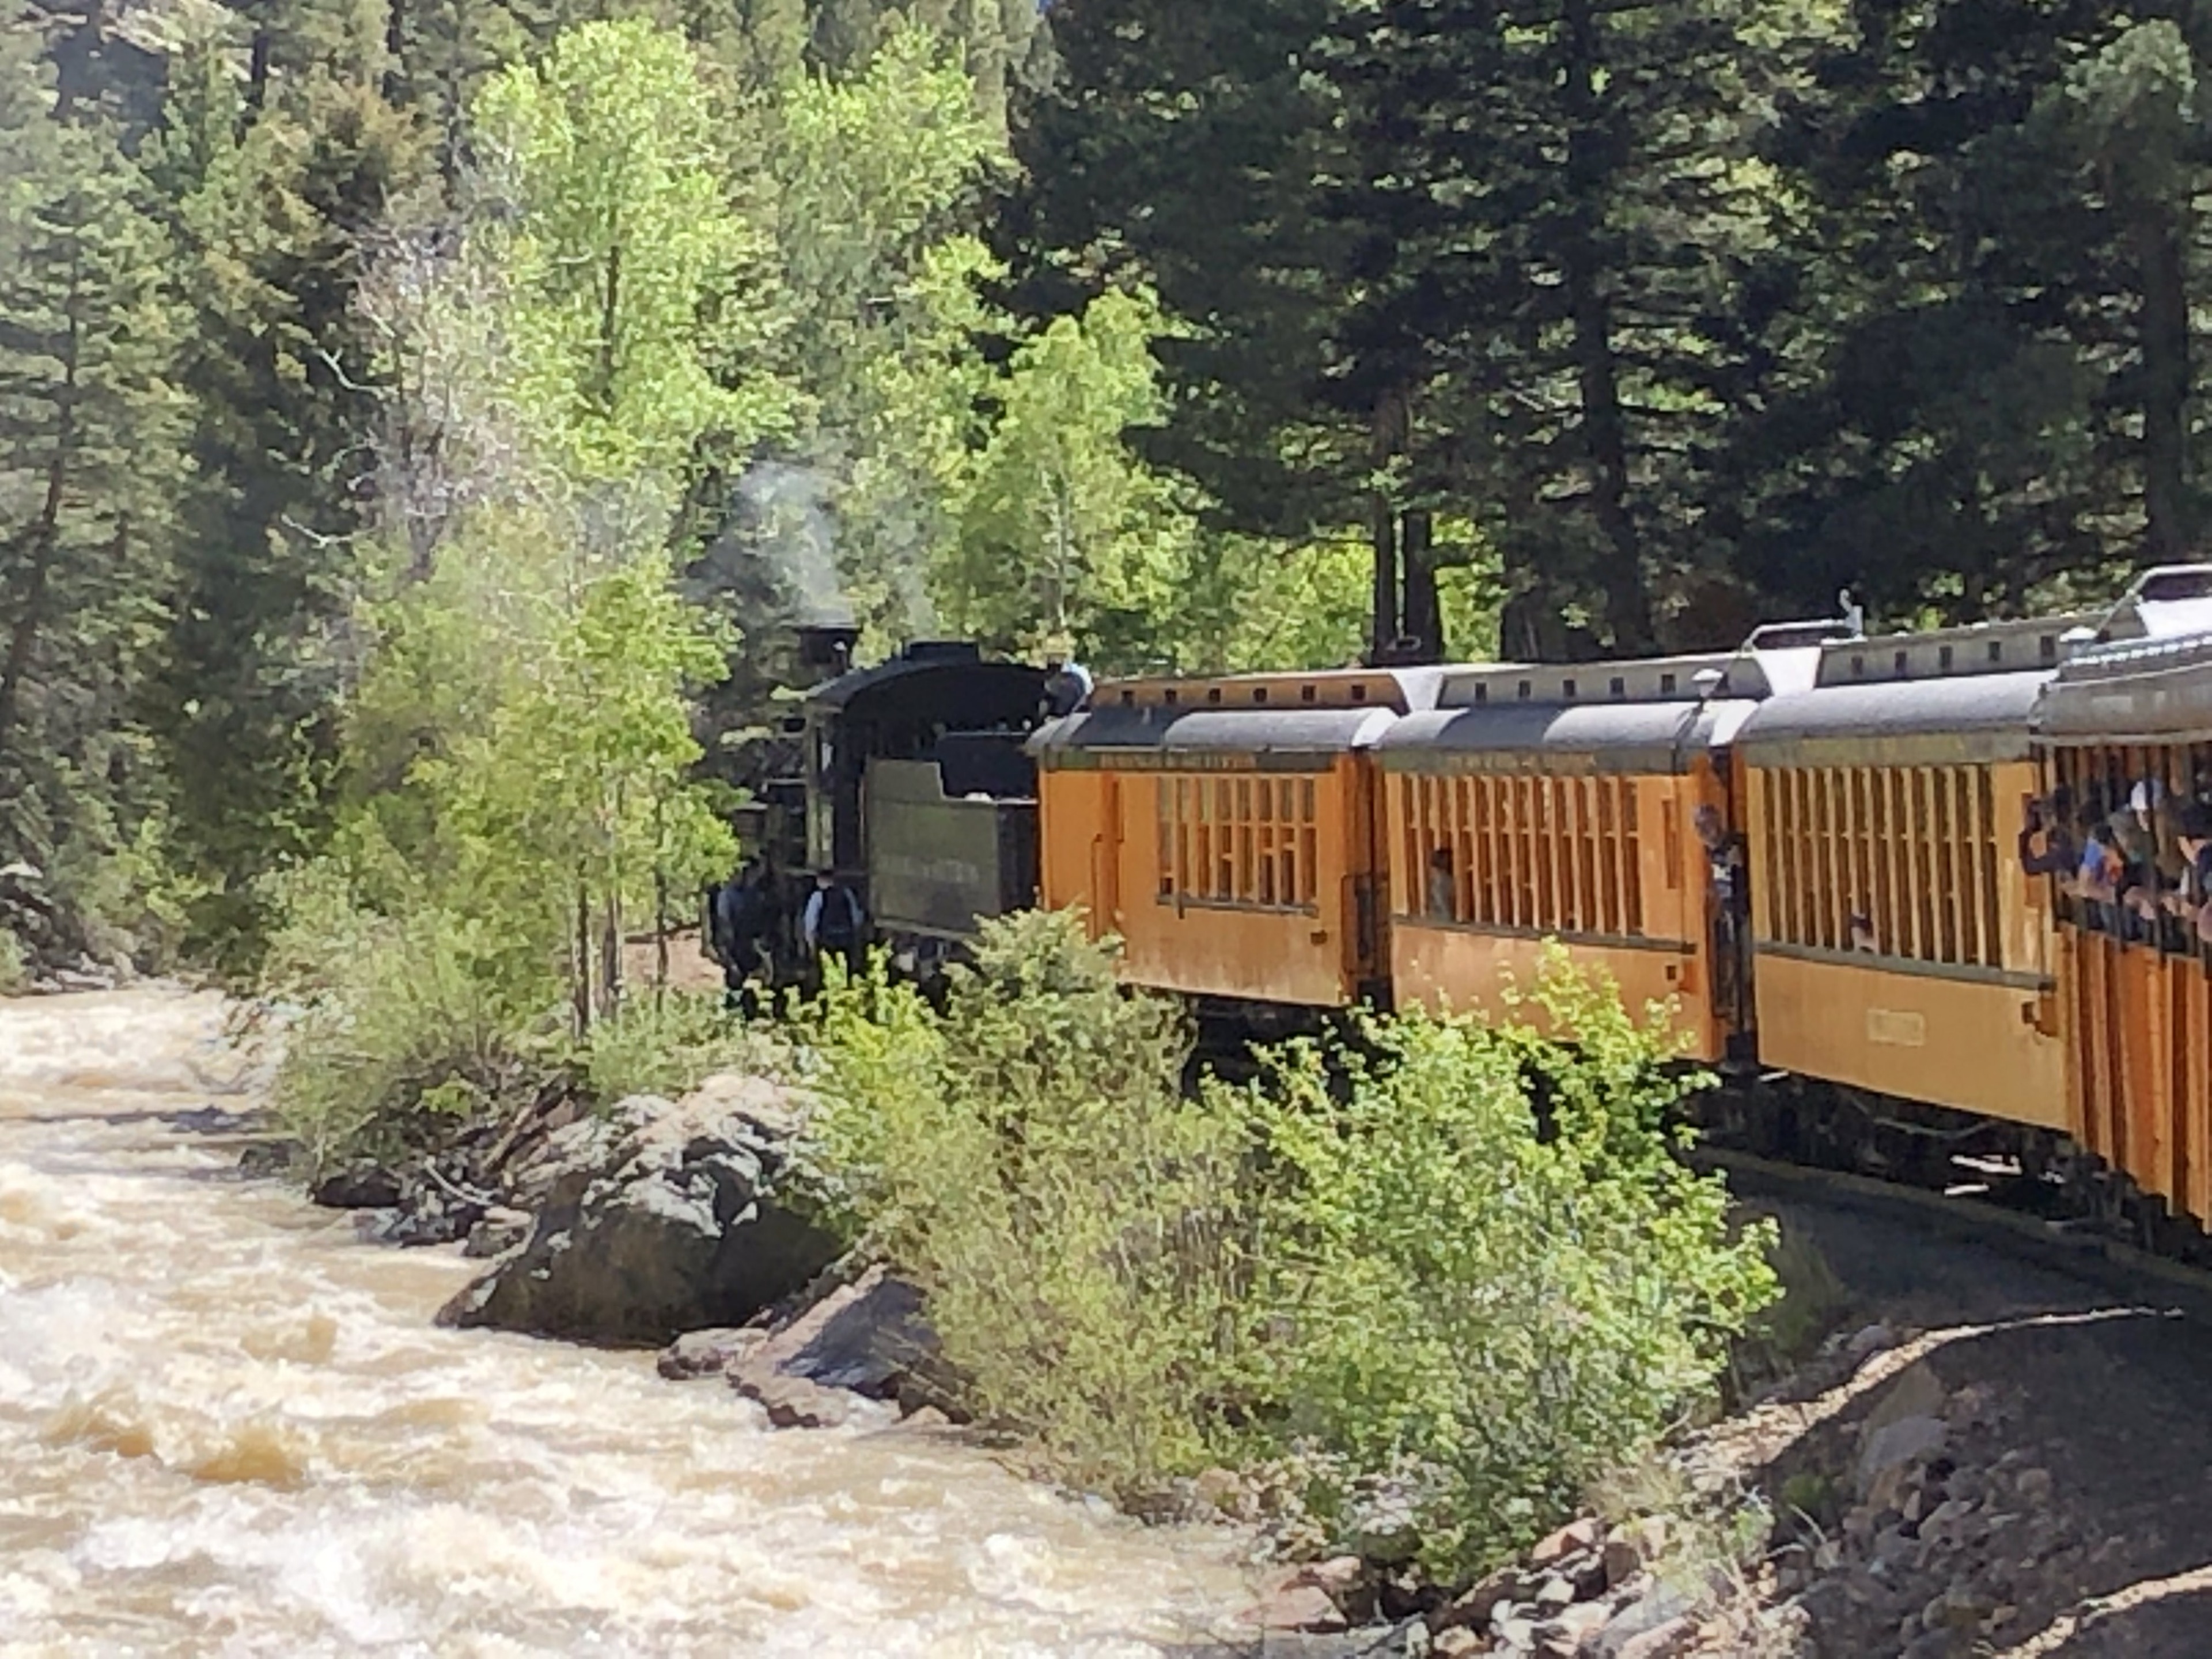 We had a great ride on the Durango & Silverton Railroad. Lots of snow melt and some whitewater rapids that were off the scale. Several avalanches have 
occurred near train lines this Spring. We stopped for a couple hours in Silverton for quick bite to eat and shop. Silverton, CO reminded us  of our recent  inner passage cruise that stopped in Skagway, Alaska.